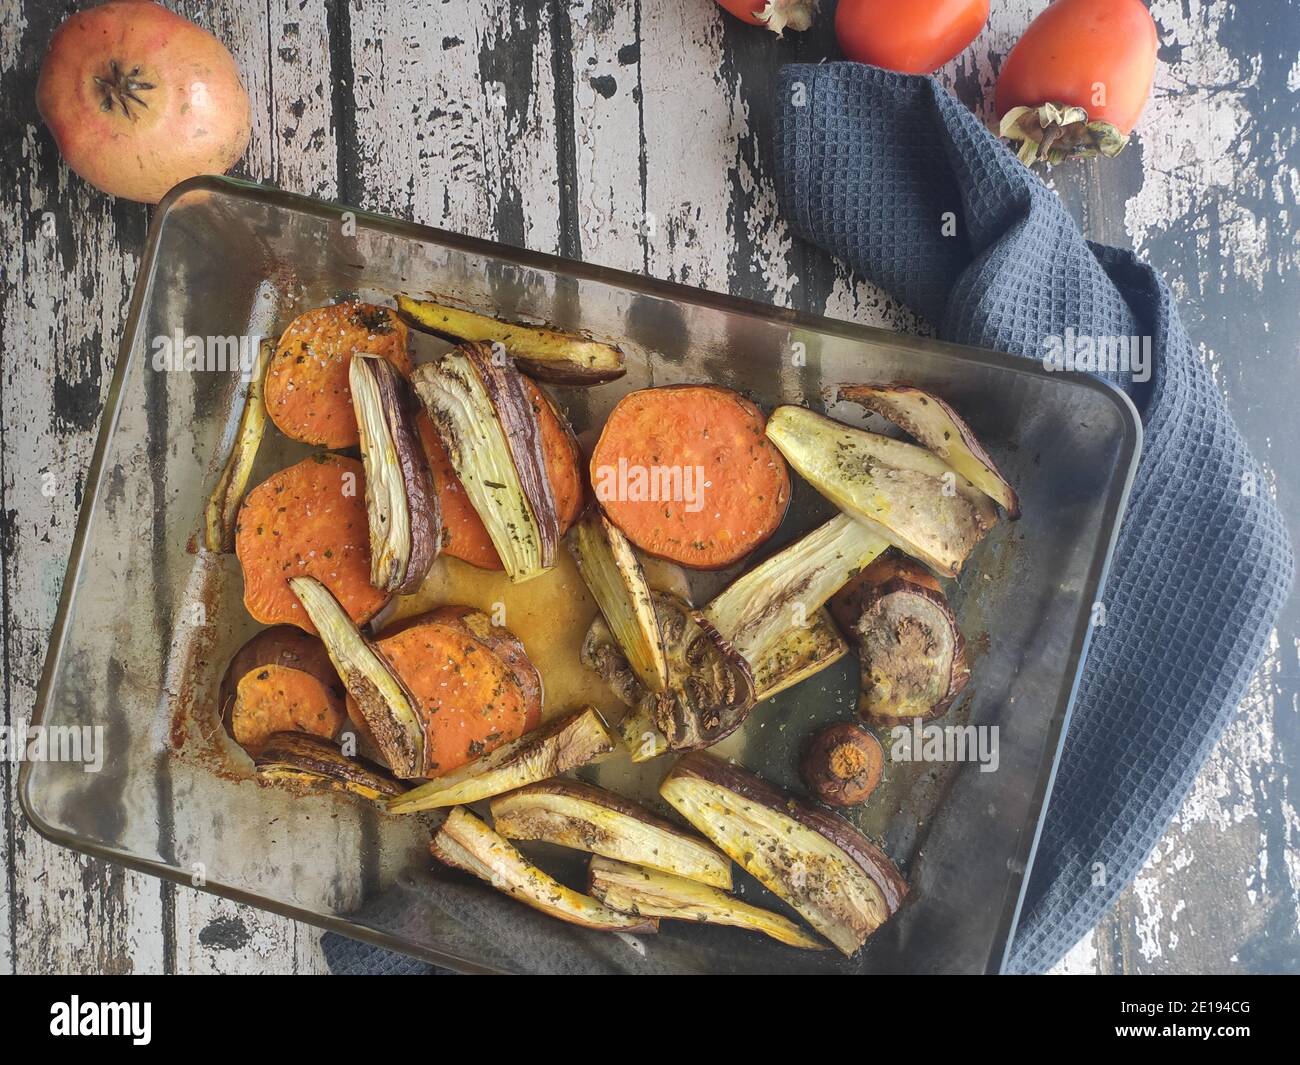 Baked vegetable in a wood table background Stock Photo